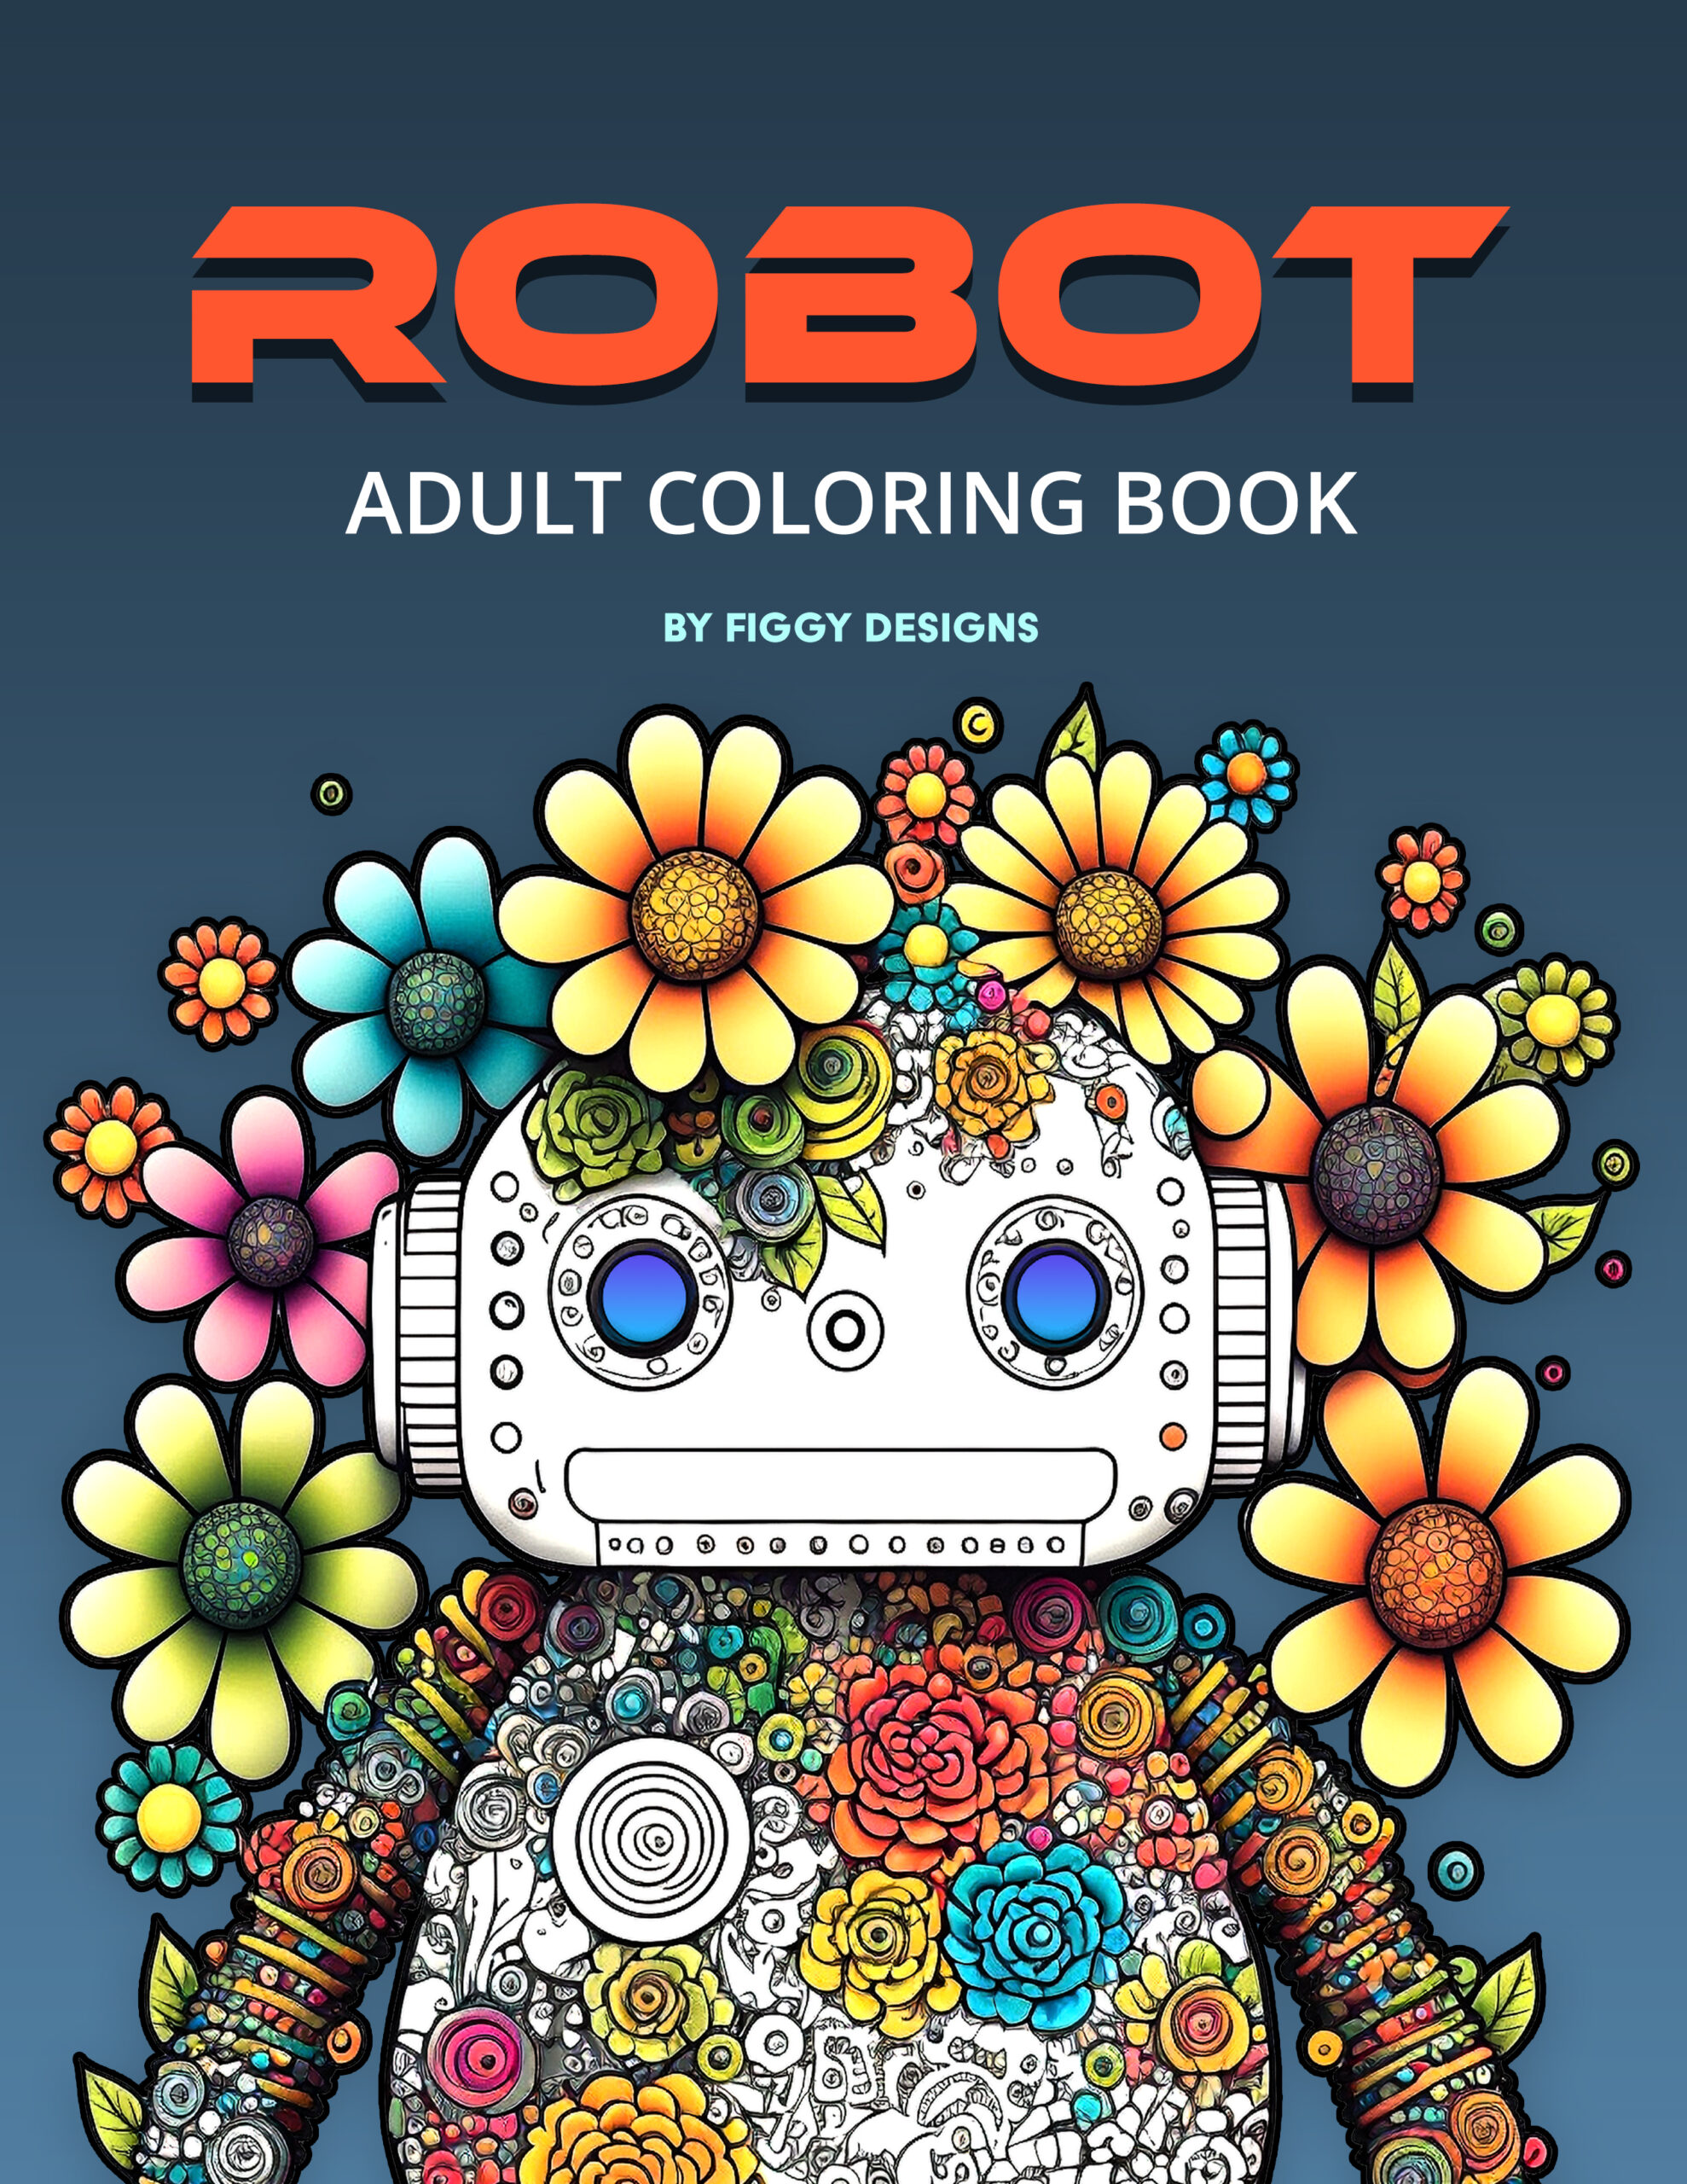 Robot: Adult Coloring Book